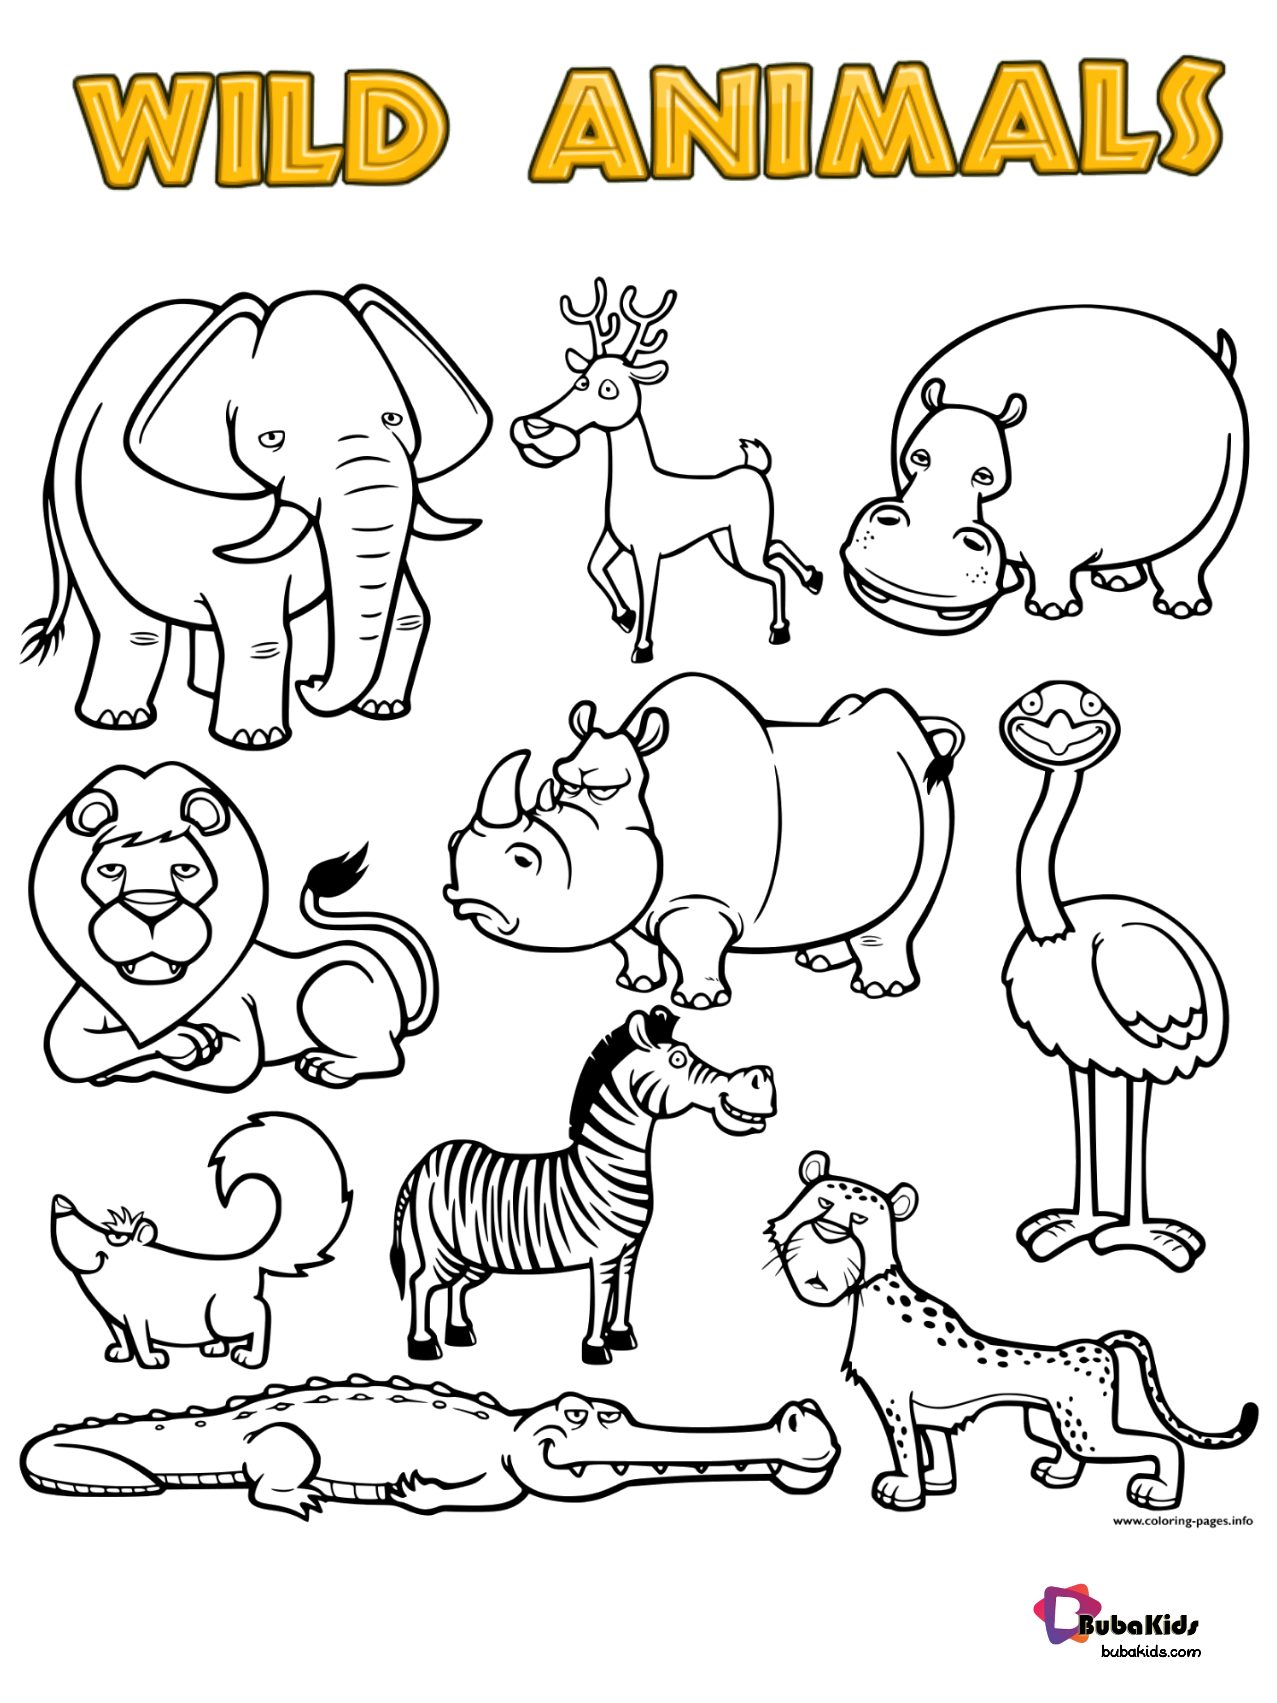 Free Wild Animals Printable Coloring Page pertaining to Free Printable Wild Animal Coloring Pages